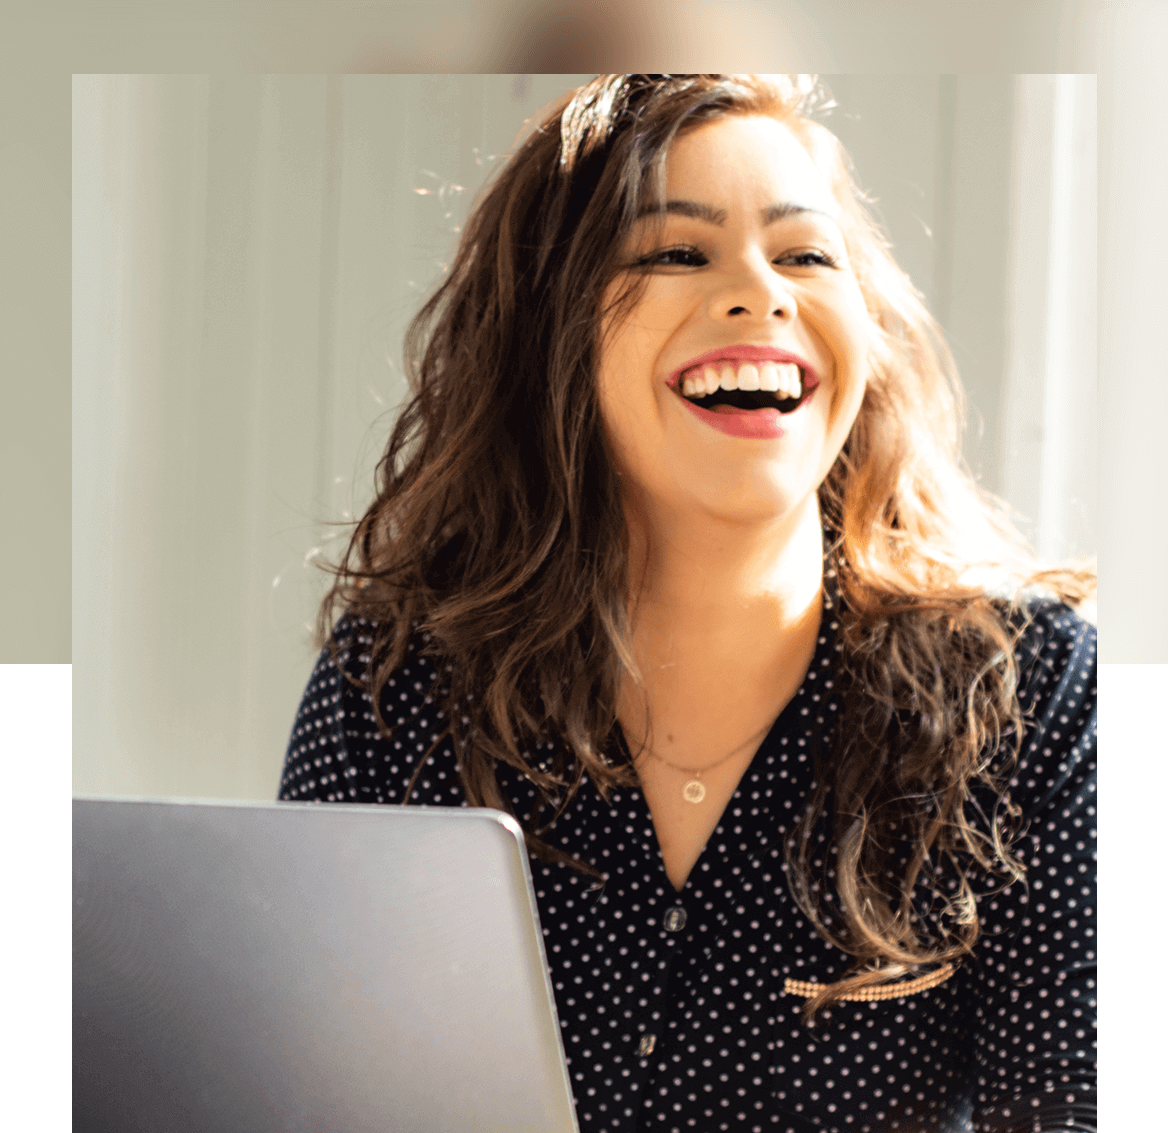 Woman smiling while working on laptop